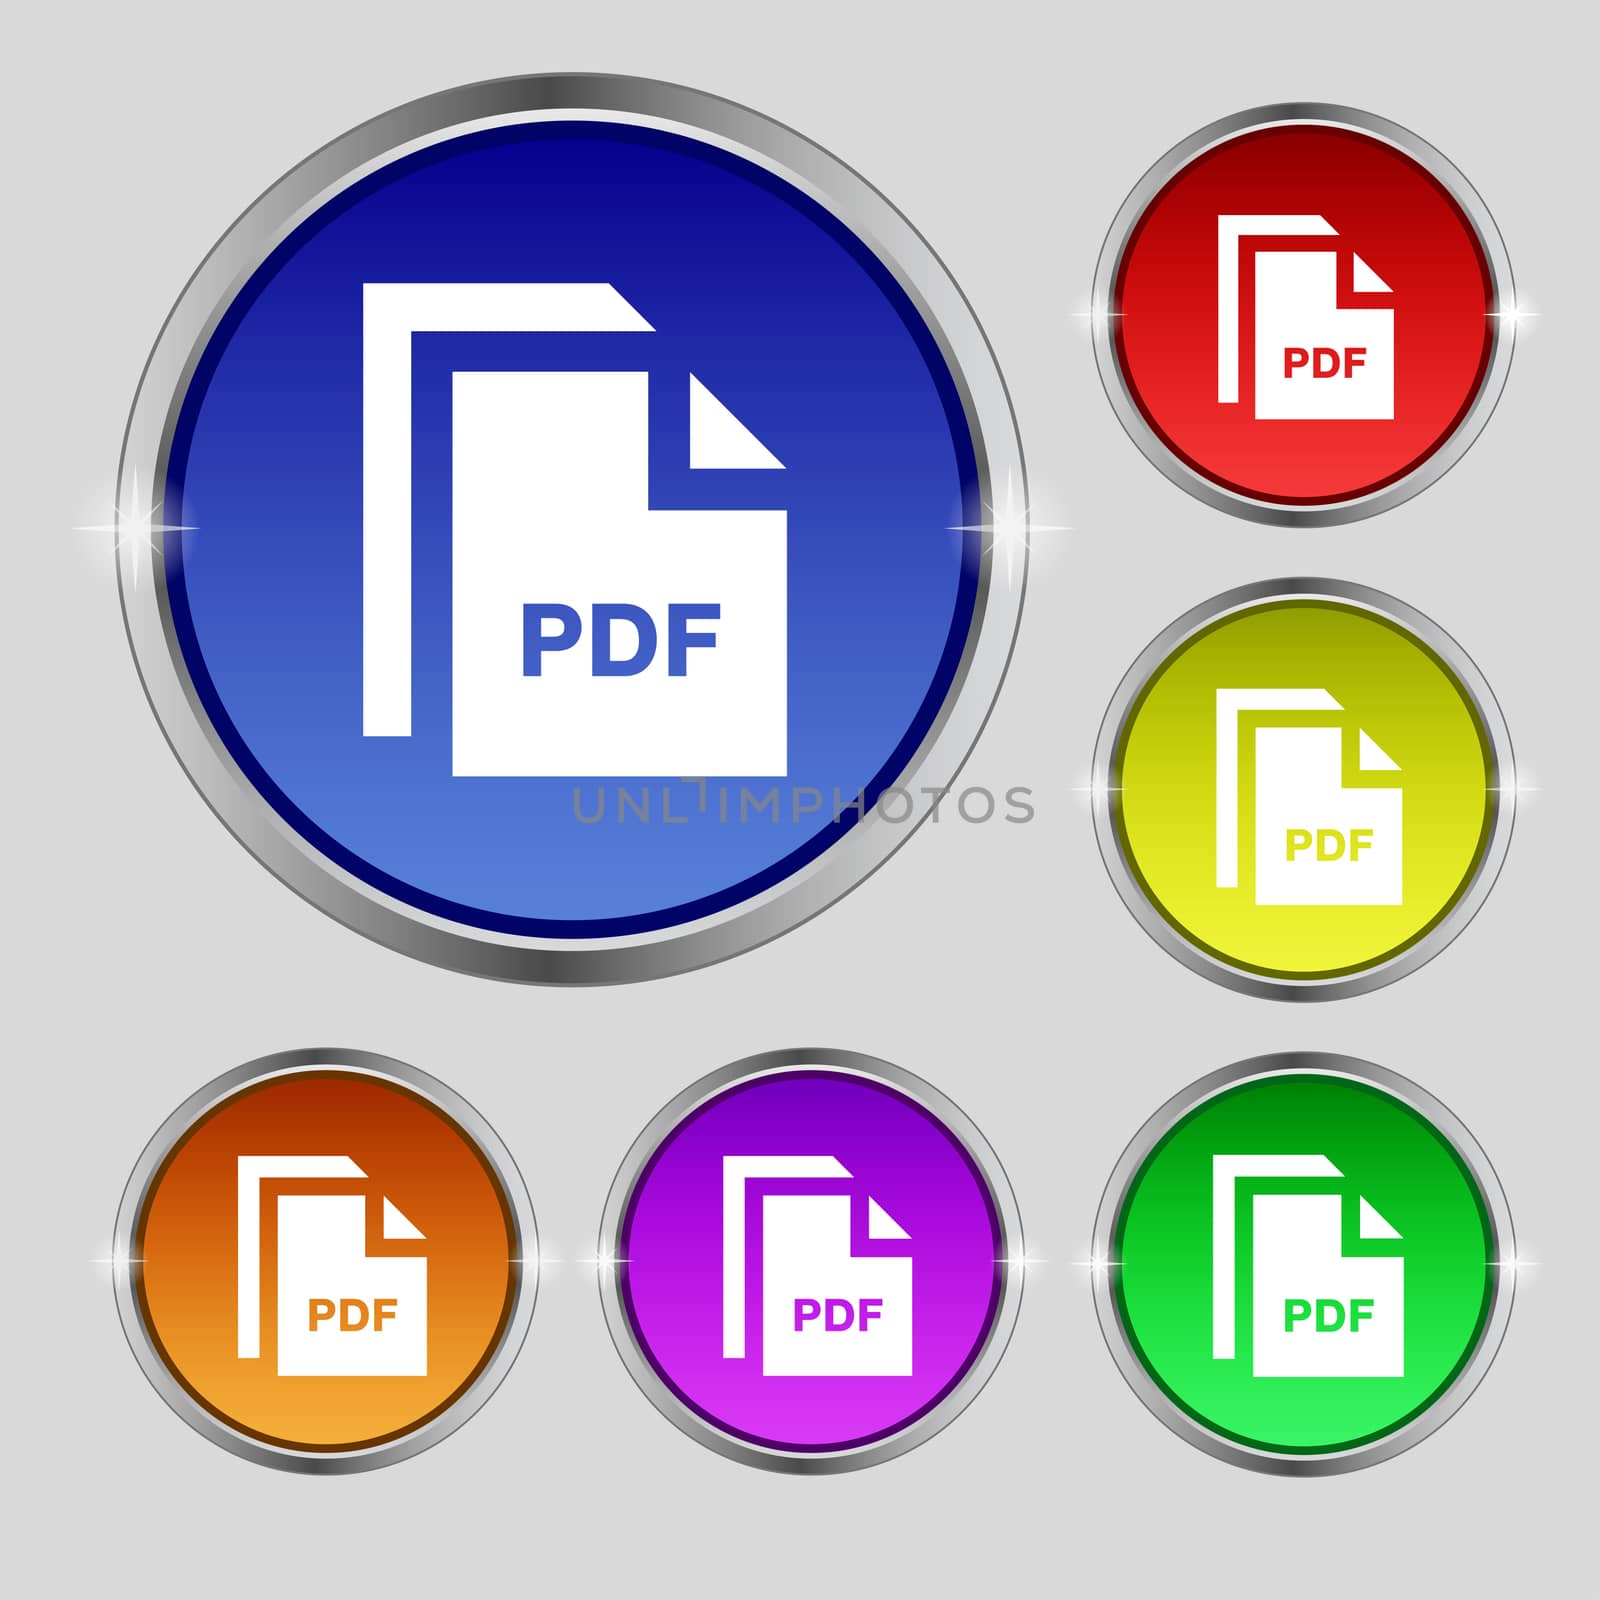 file PDF icon sign. Round symbol on bright colourful buttons.  by serhii_lohvyniuk